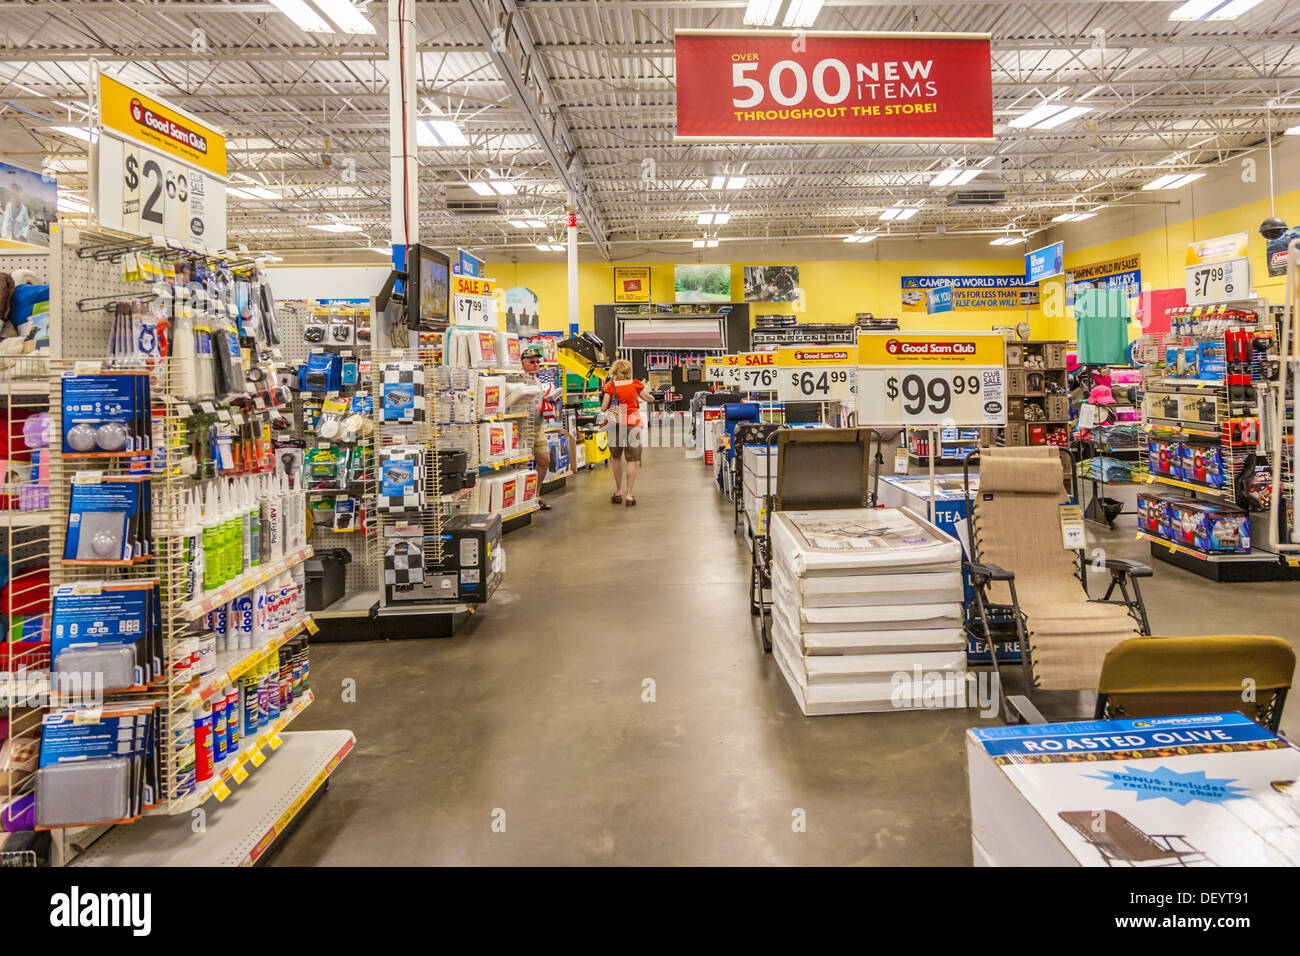 Interior of Camping World retail camping gear store in USA Stock Photo -  Alamy